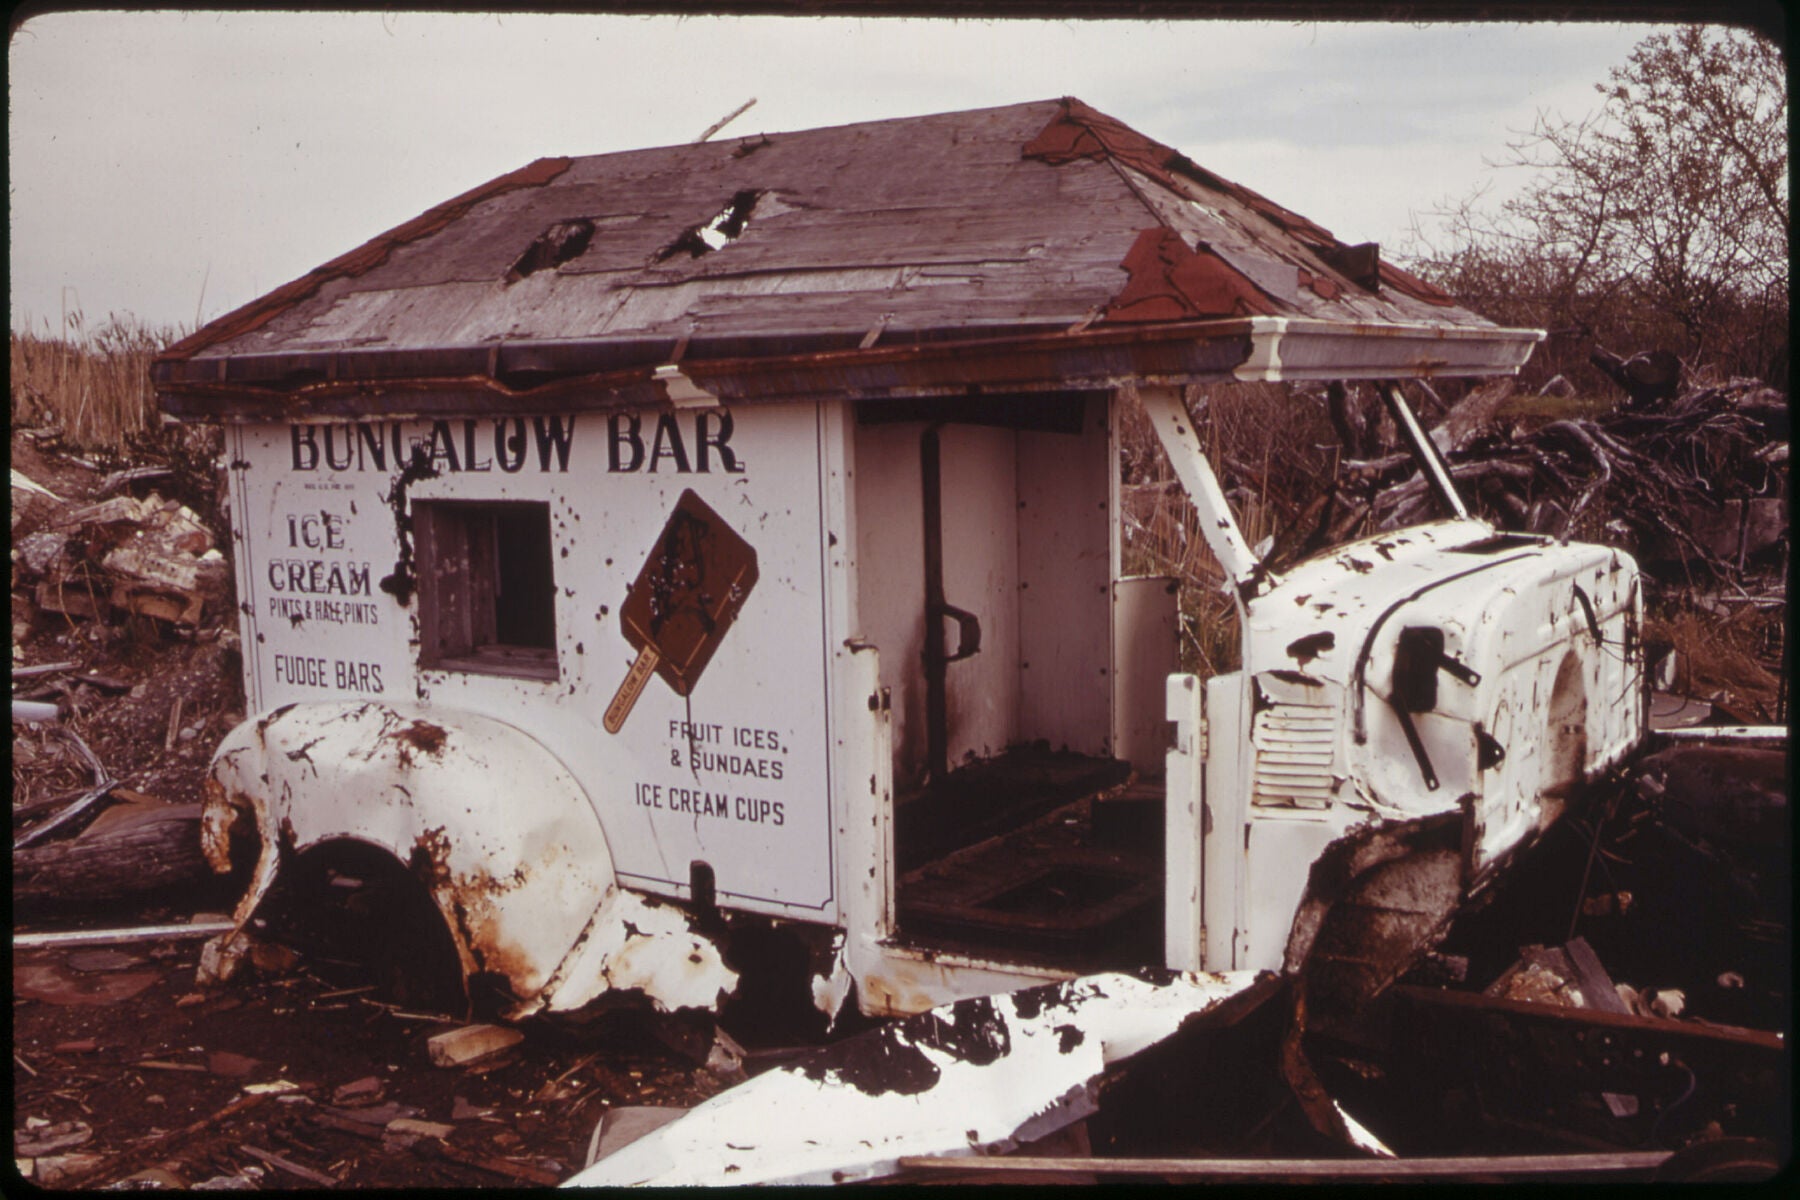 Abandoned Ice Cream Wagon at Broad Channel in Jamaica Bay by Arthur Tress - 1973